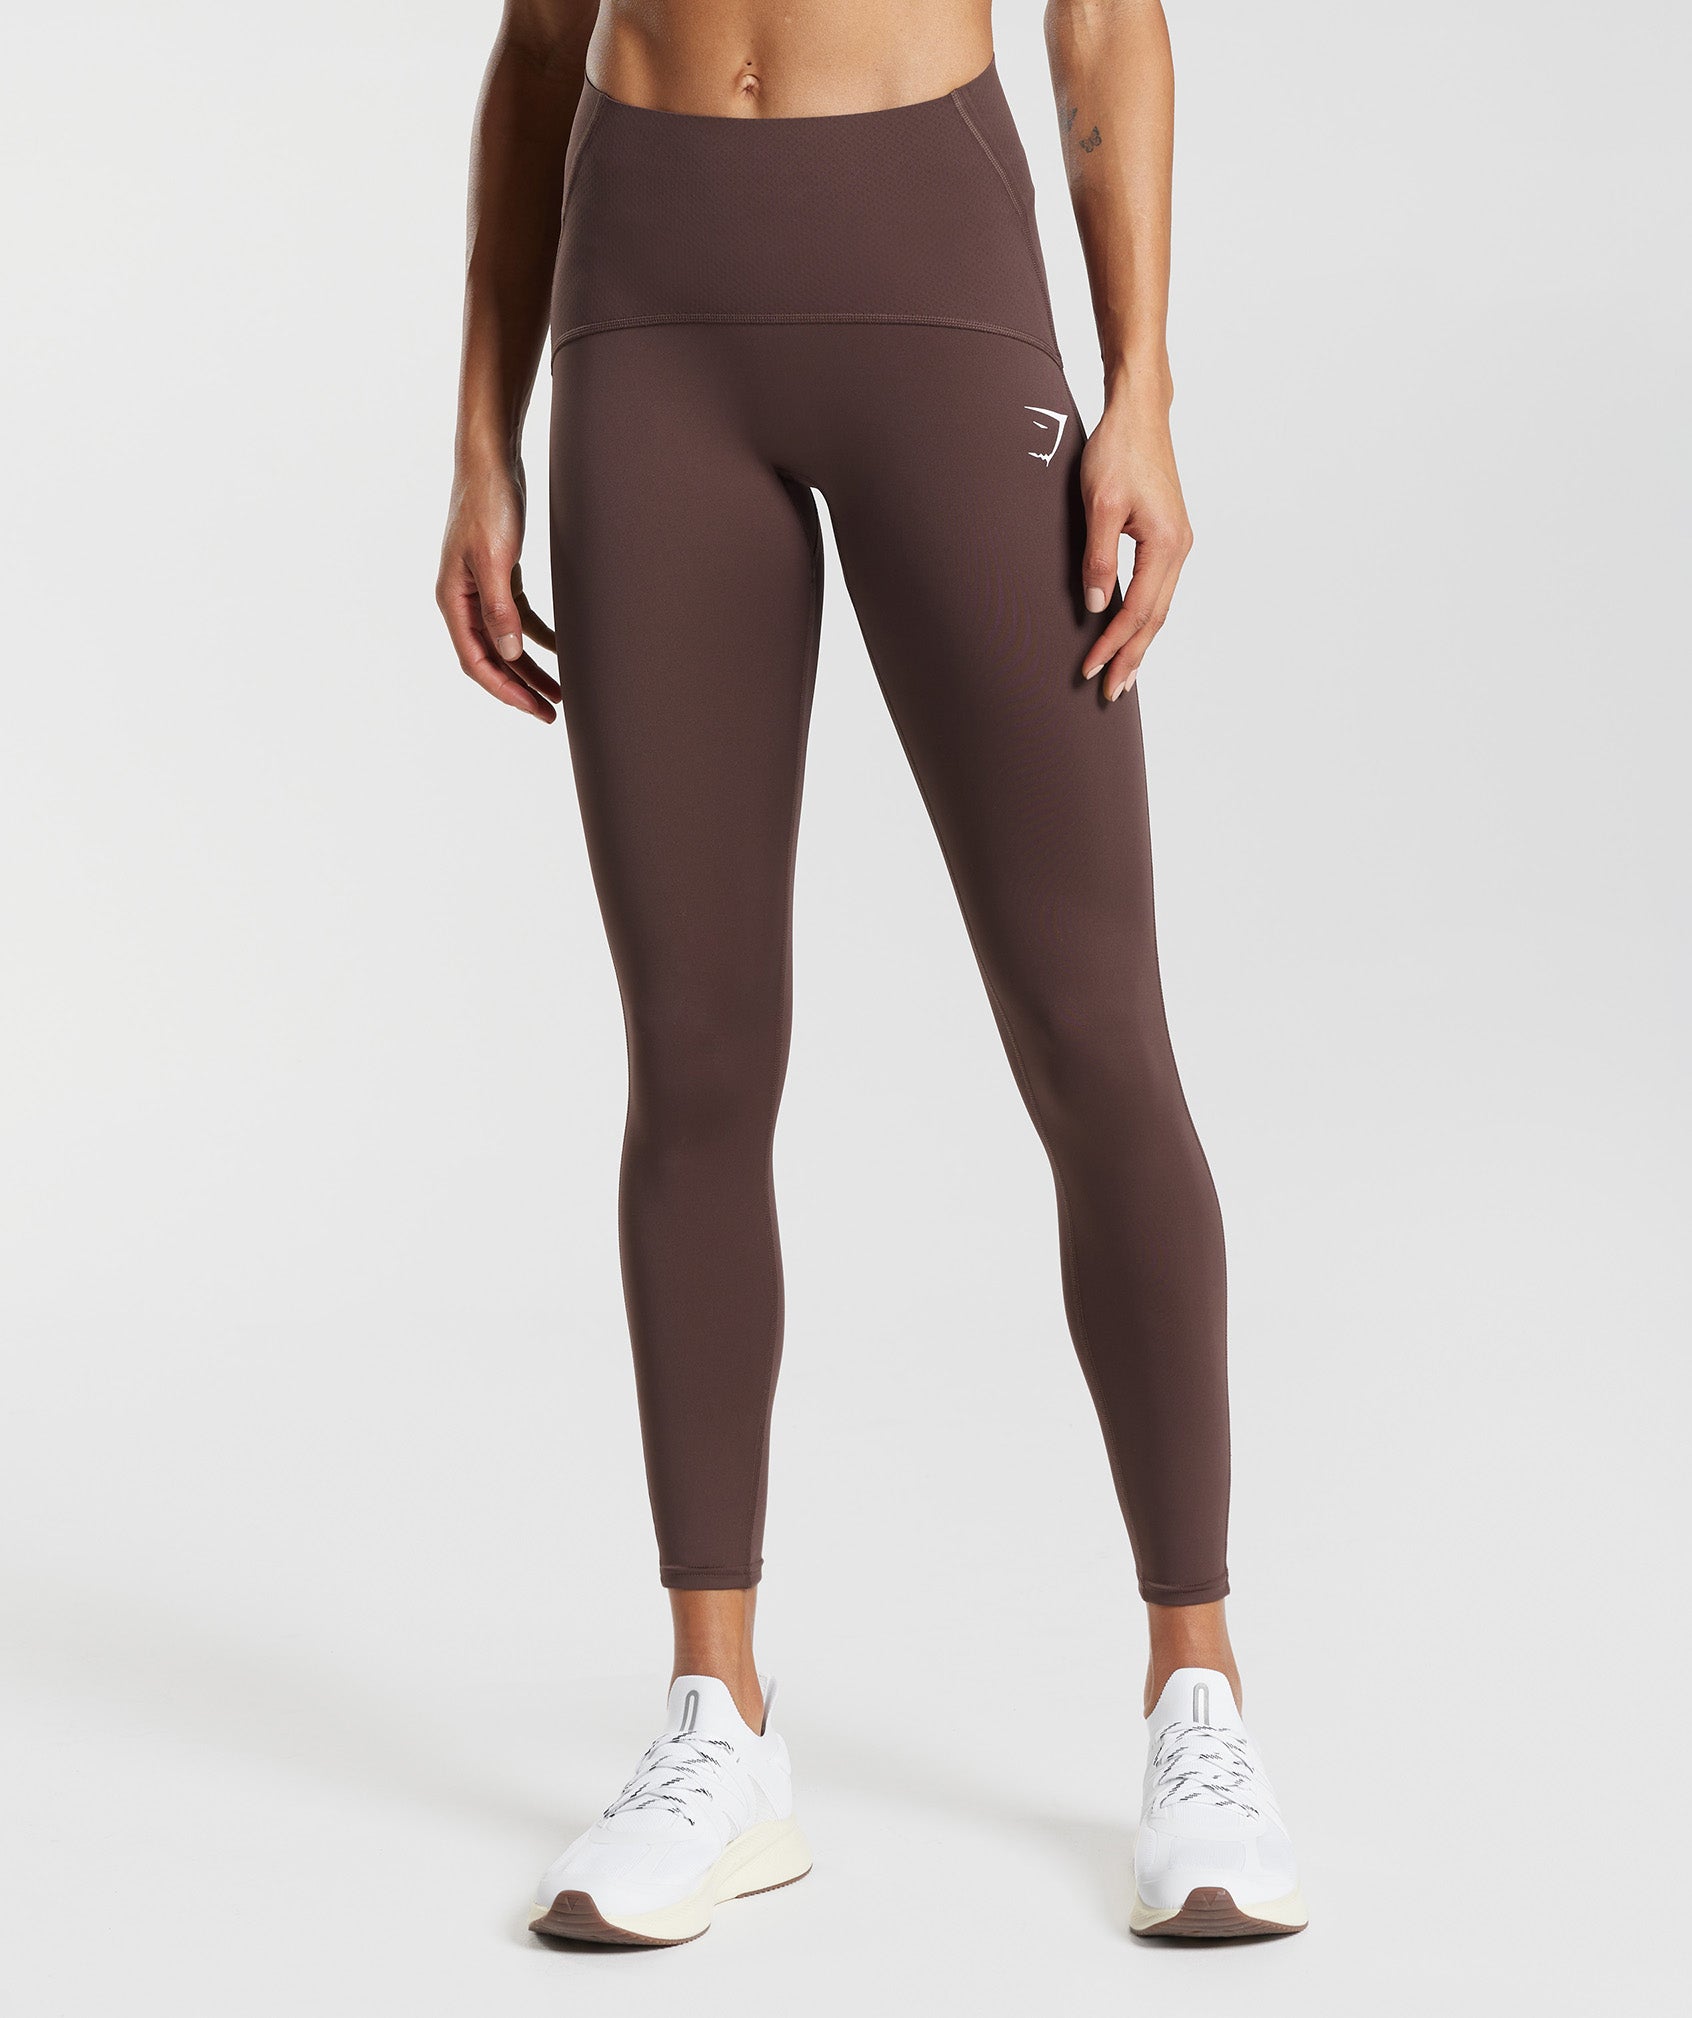 https://cdn.shopify.com/s/files/1/1367/5201/products/IconSupportLeggingsChocolateBrownB2A8T-NBRL-2428.8_92fe2bc0-aad4-4297-82c8-6ee9e6be1001.jpg?v=1679665031